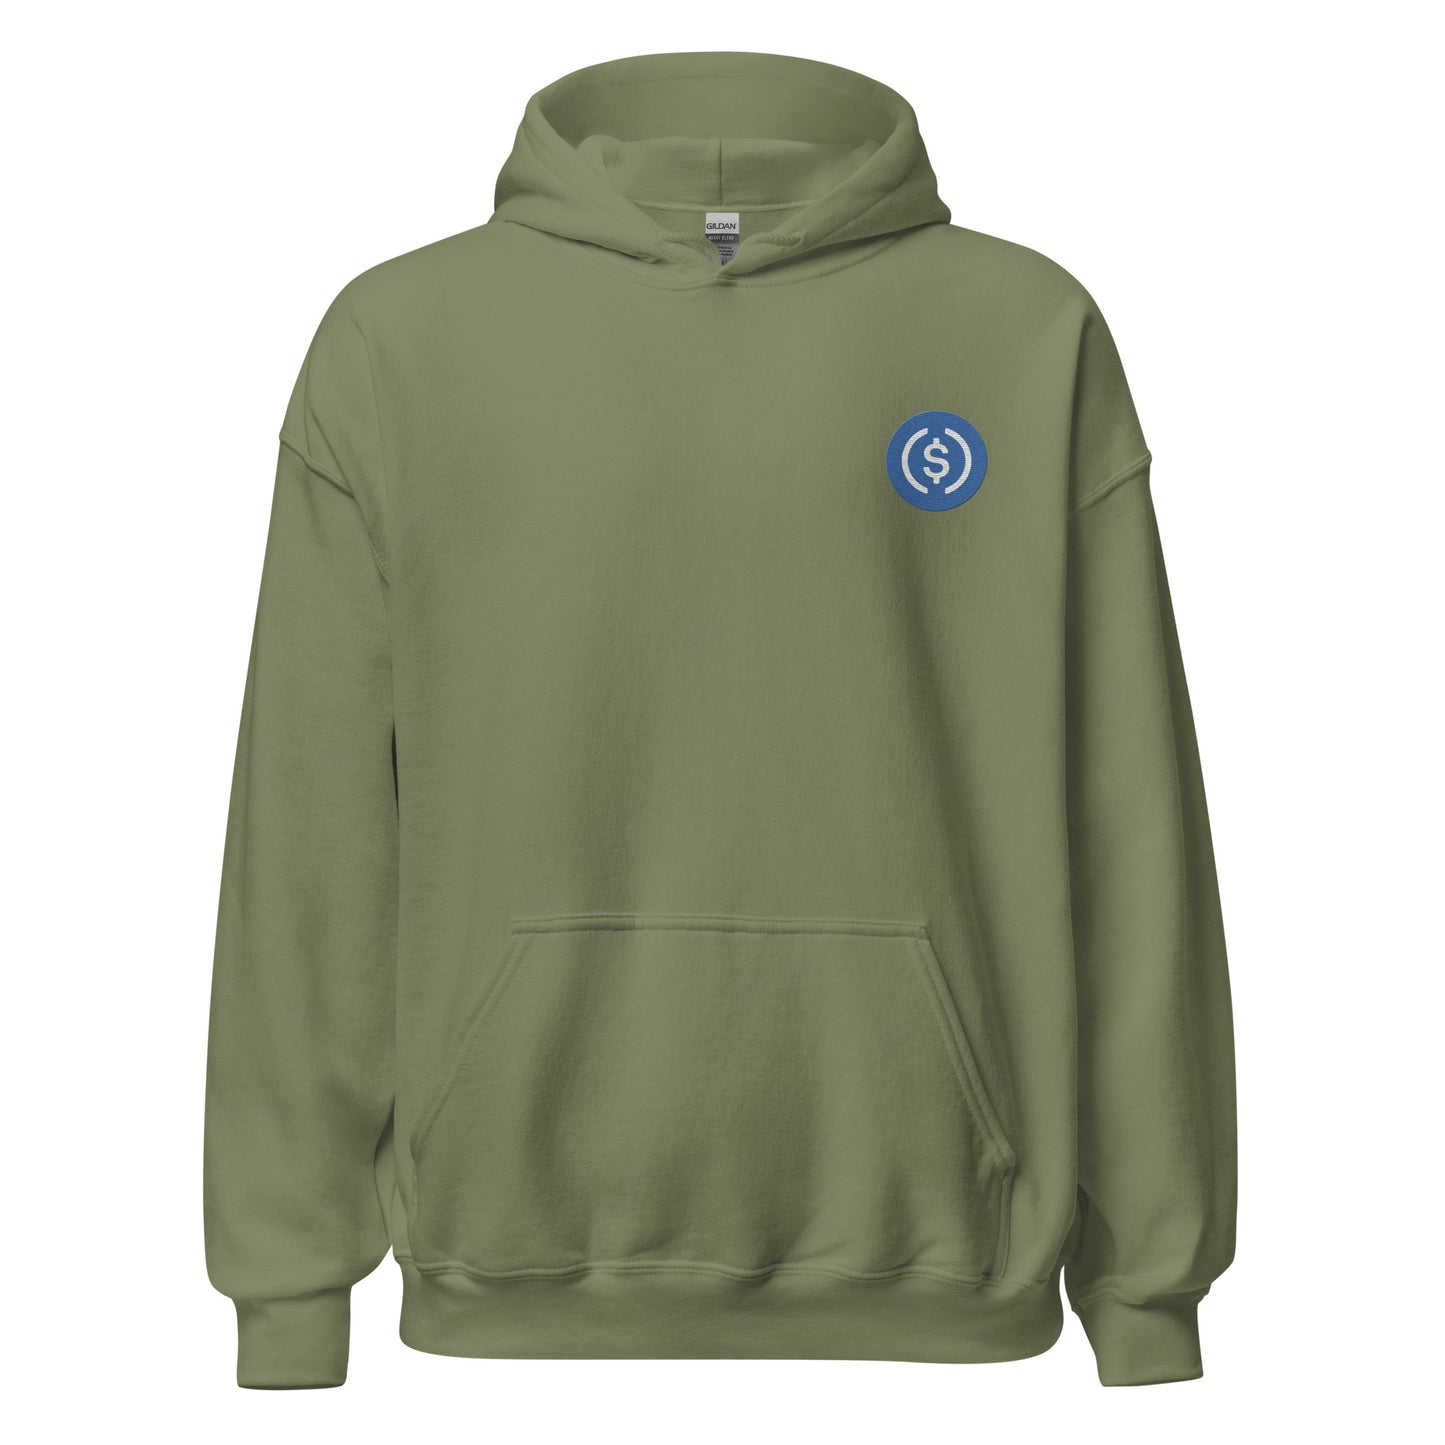 USD Coin (USDC) - Unisex Hoodie